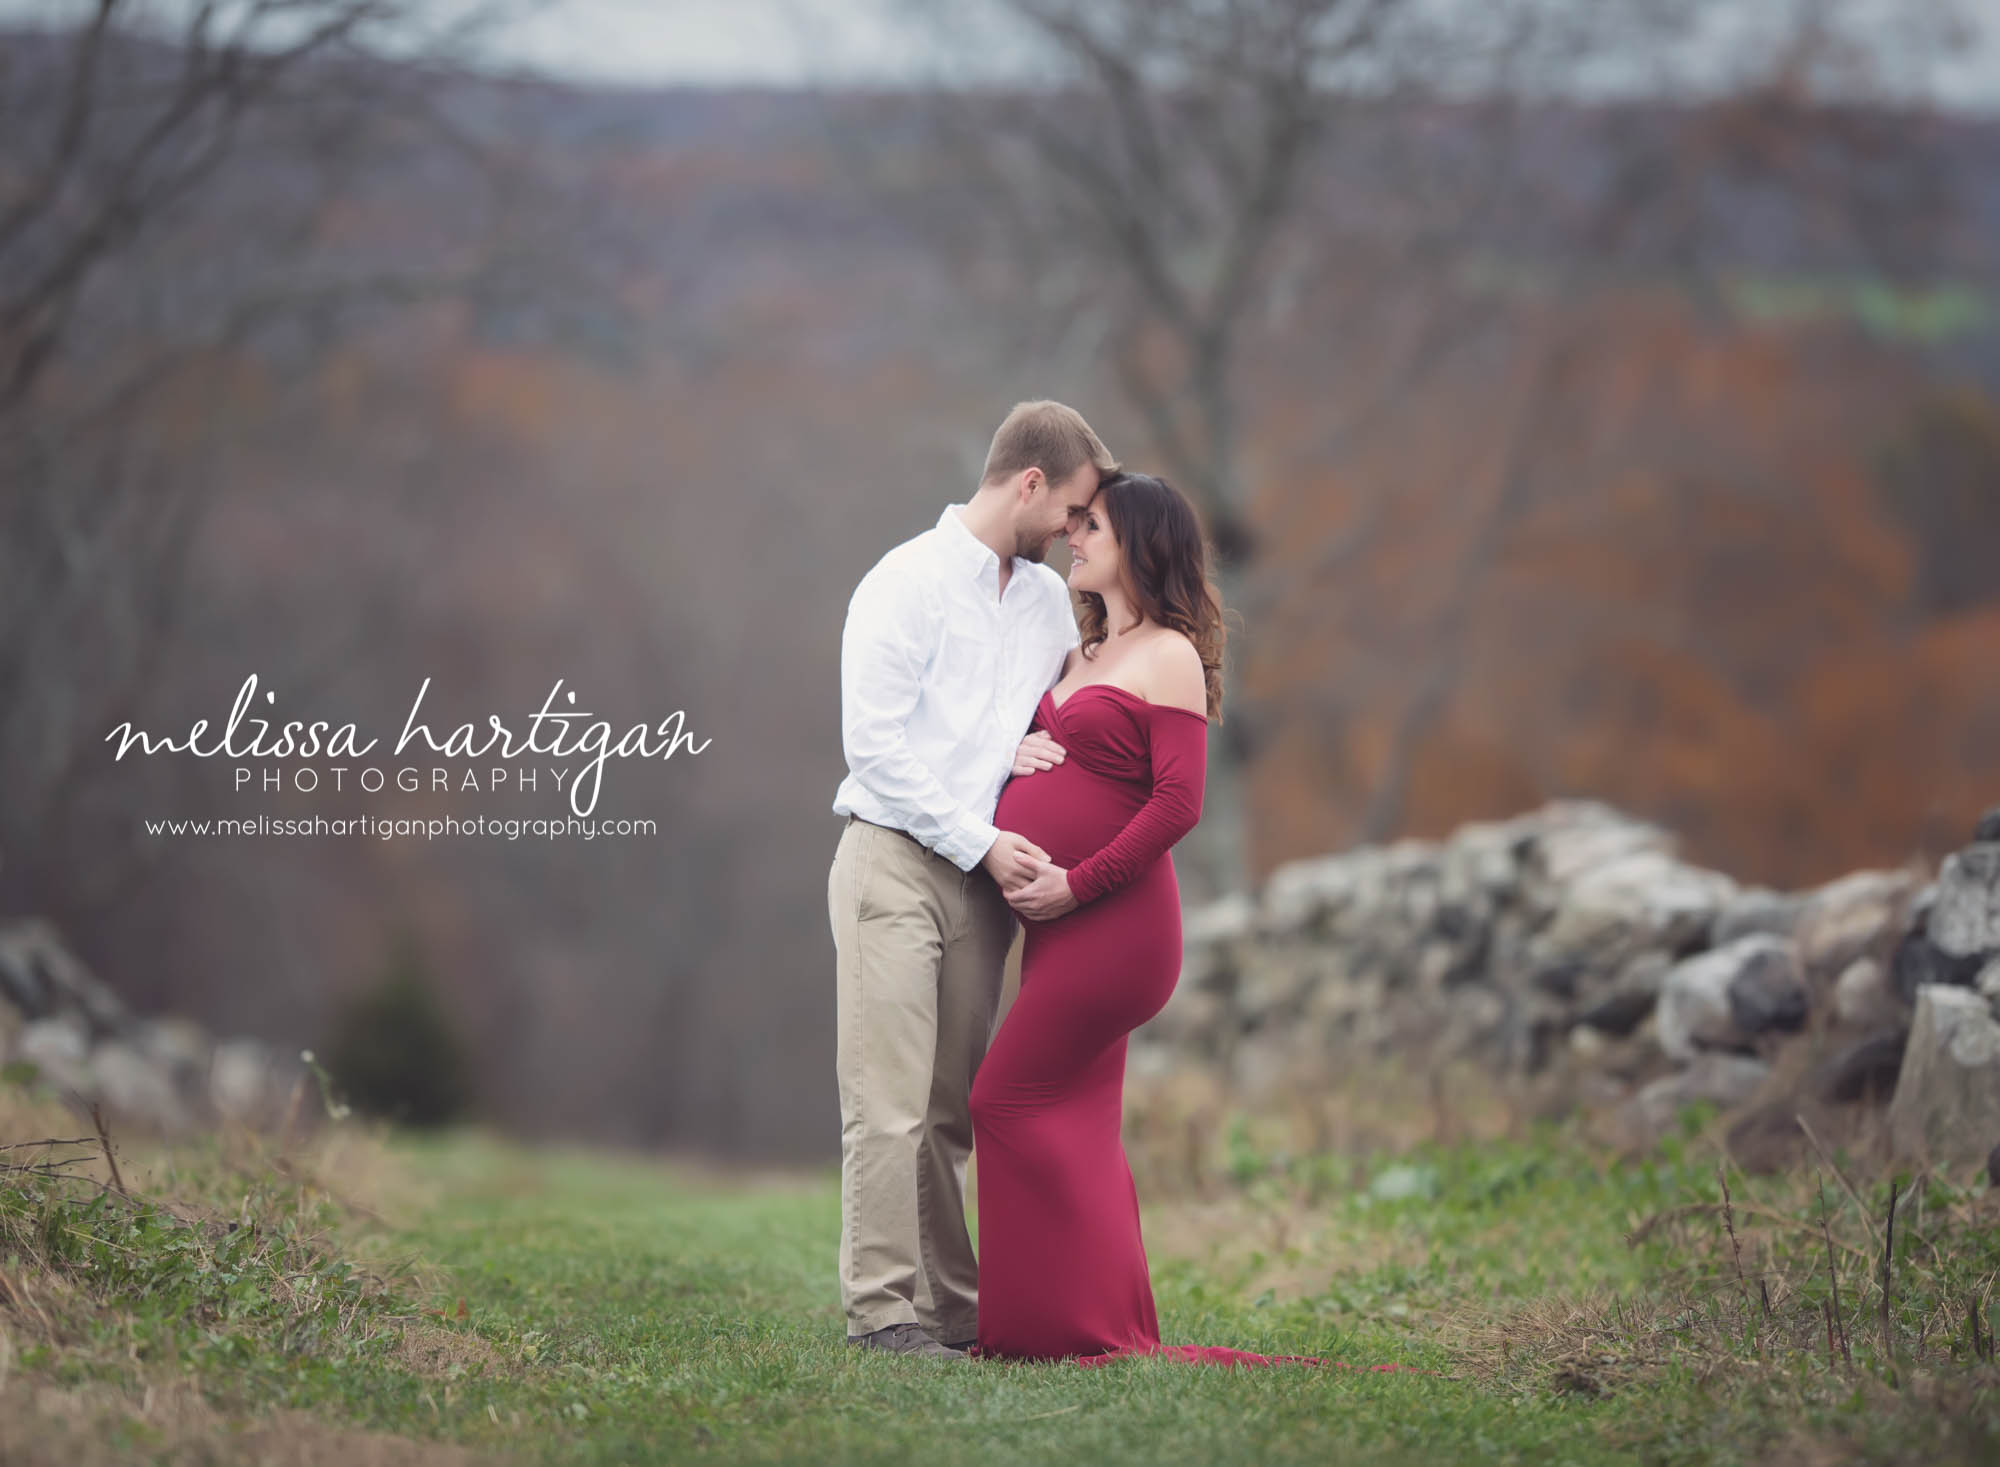 Melissa Hartigan Photography Coventry CT Newborn & Maternity Photographer Coventry CT Maternity Newborn Session Carrie wearing red maternity gown standing in field with husband holding baby bump touching faces